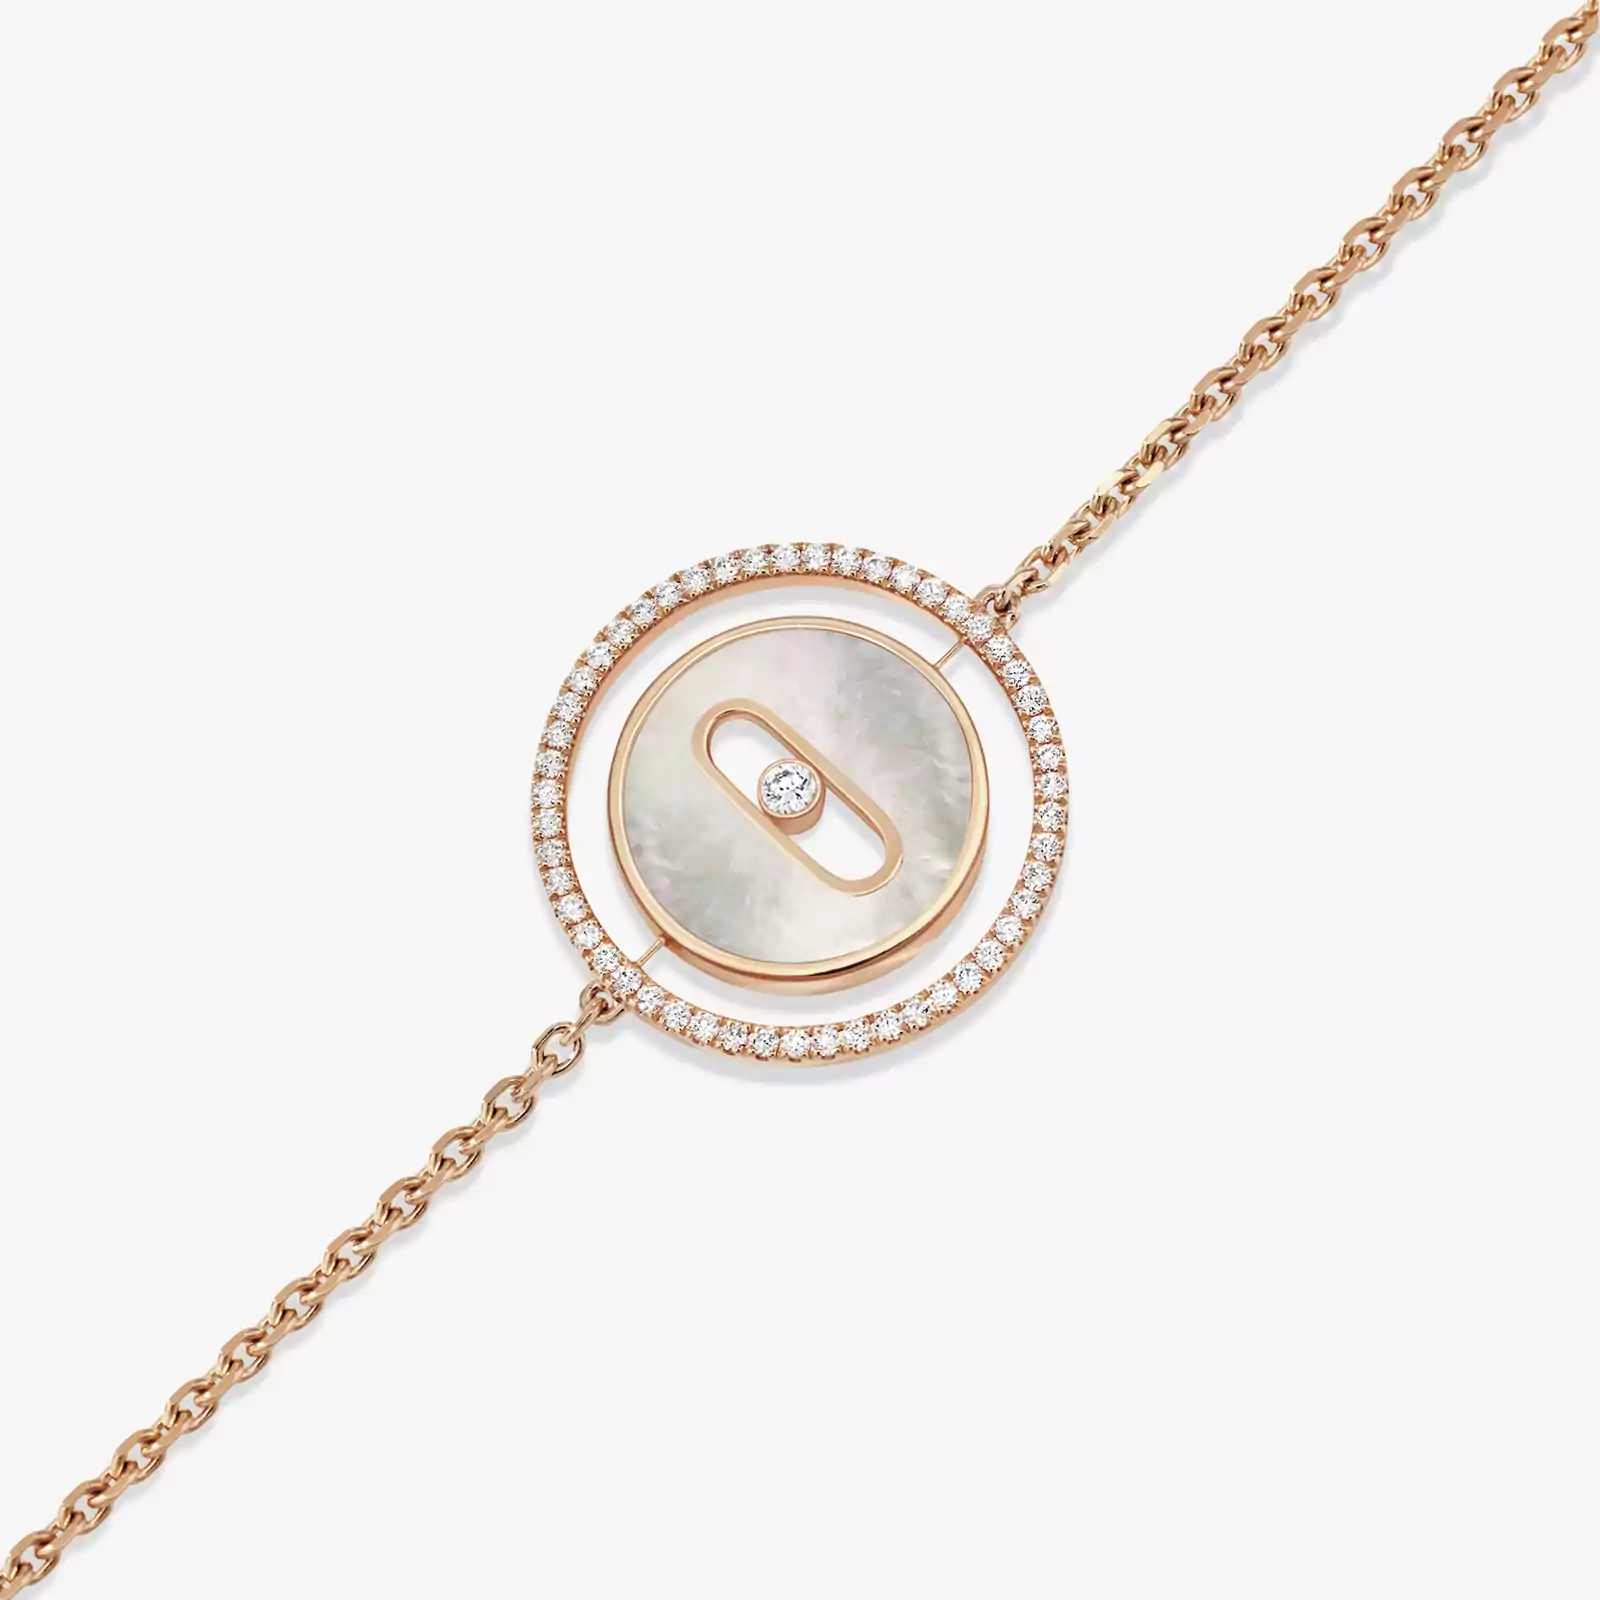 Lucky Move SM White Mother-of-Pearl Pink Gold For Her Diamond Bracelet 11653-PG